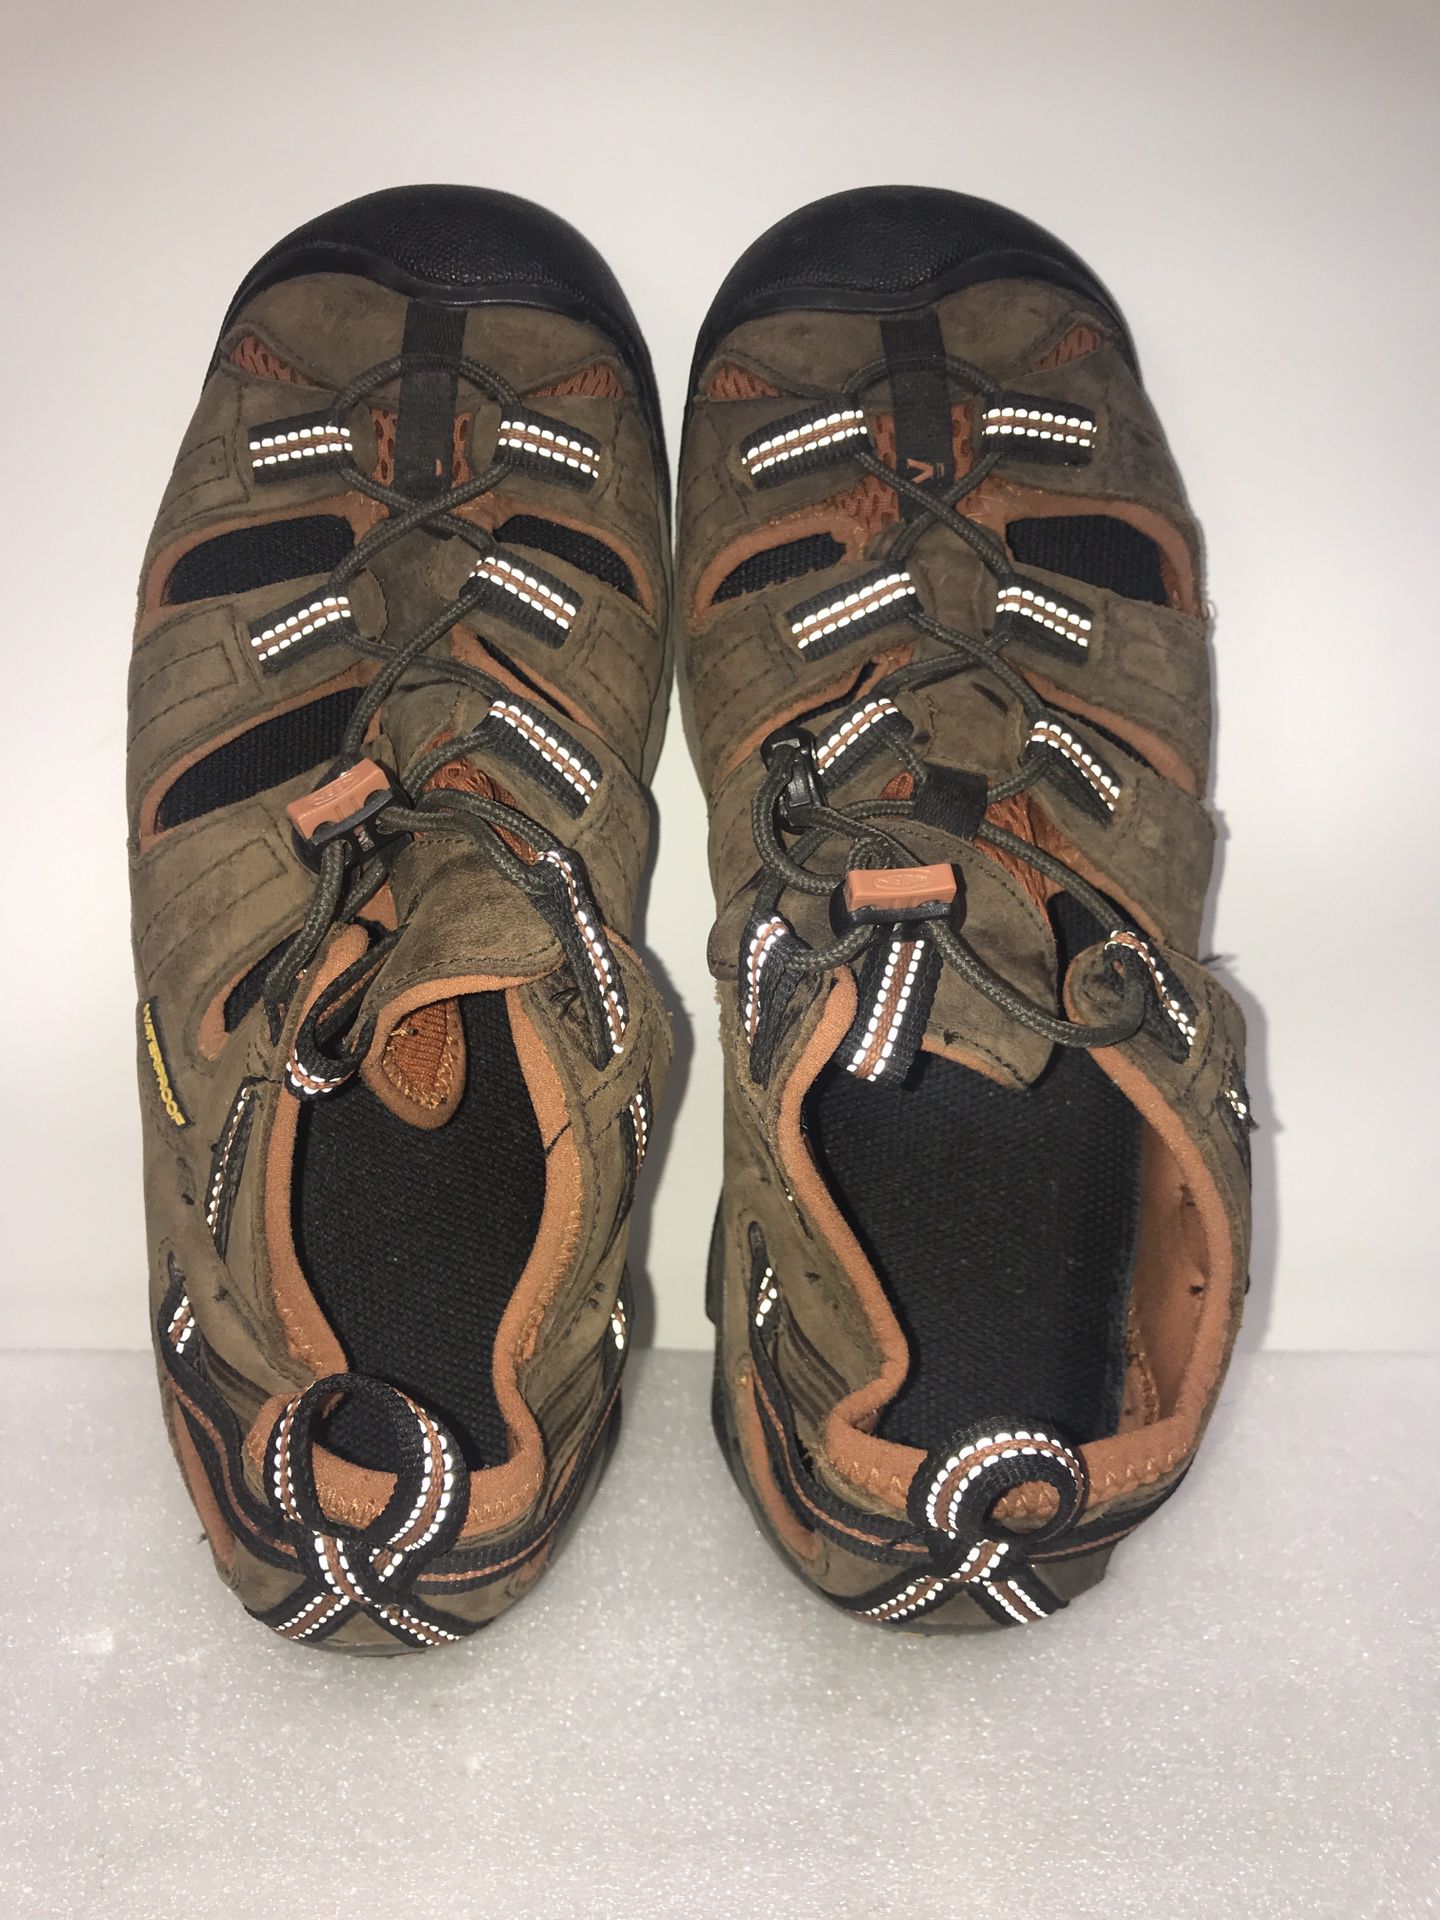 Keen Leather Comfortable Sandals Size 9